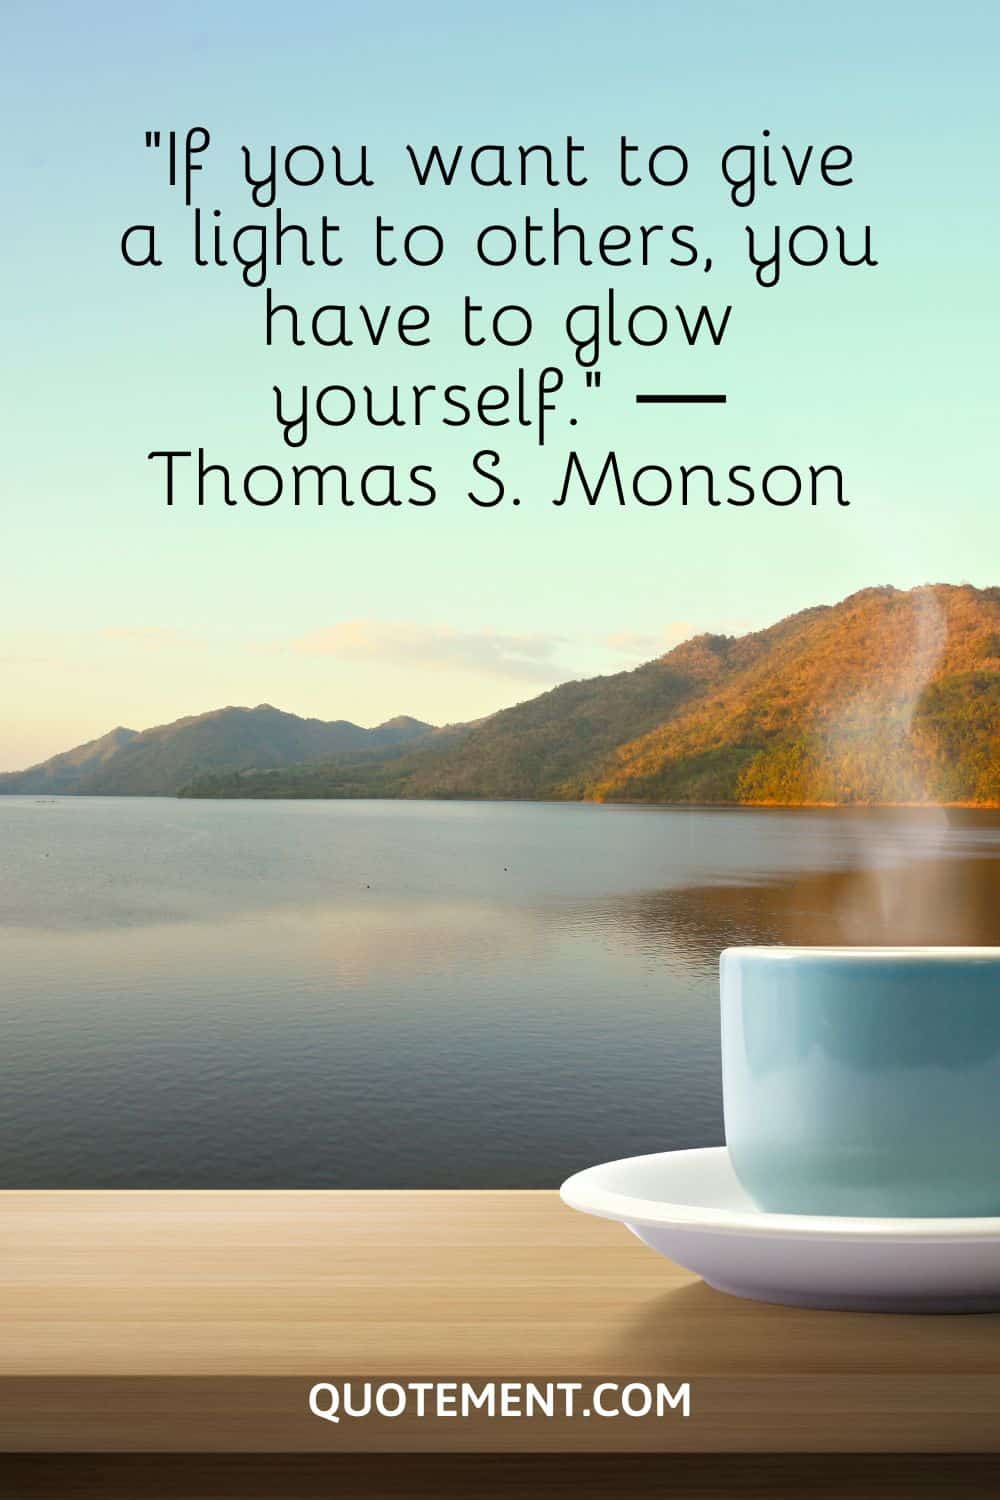 If you want to give a light to others, you have to glow yourself